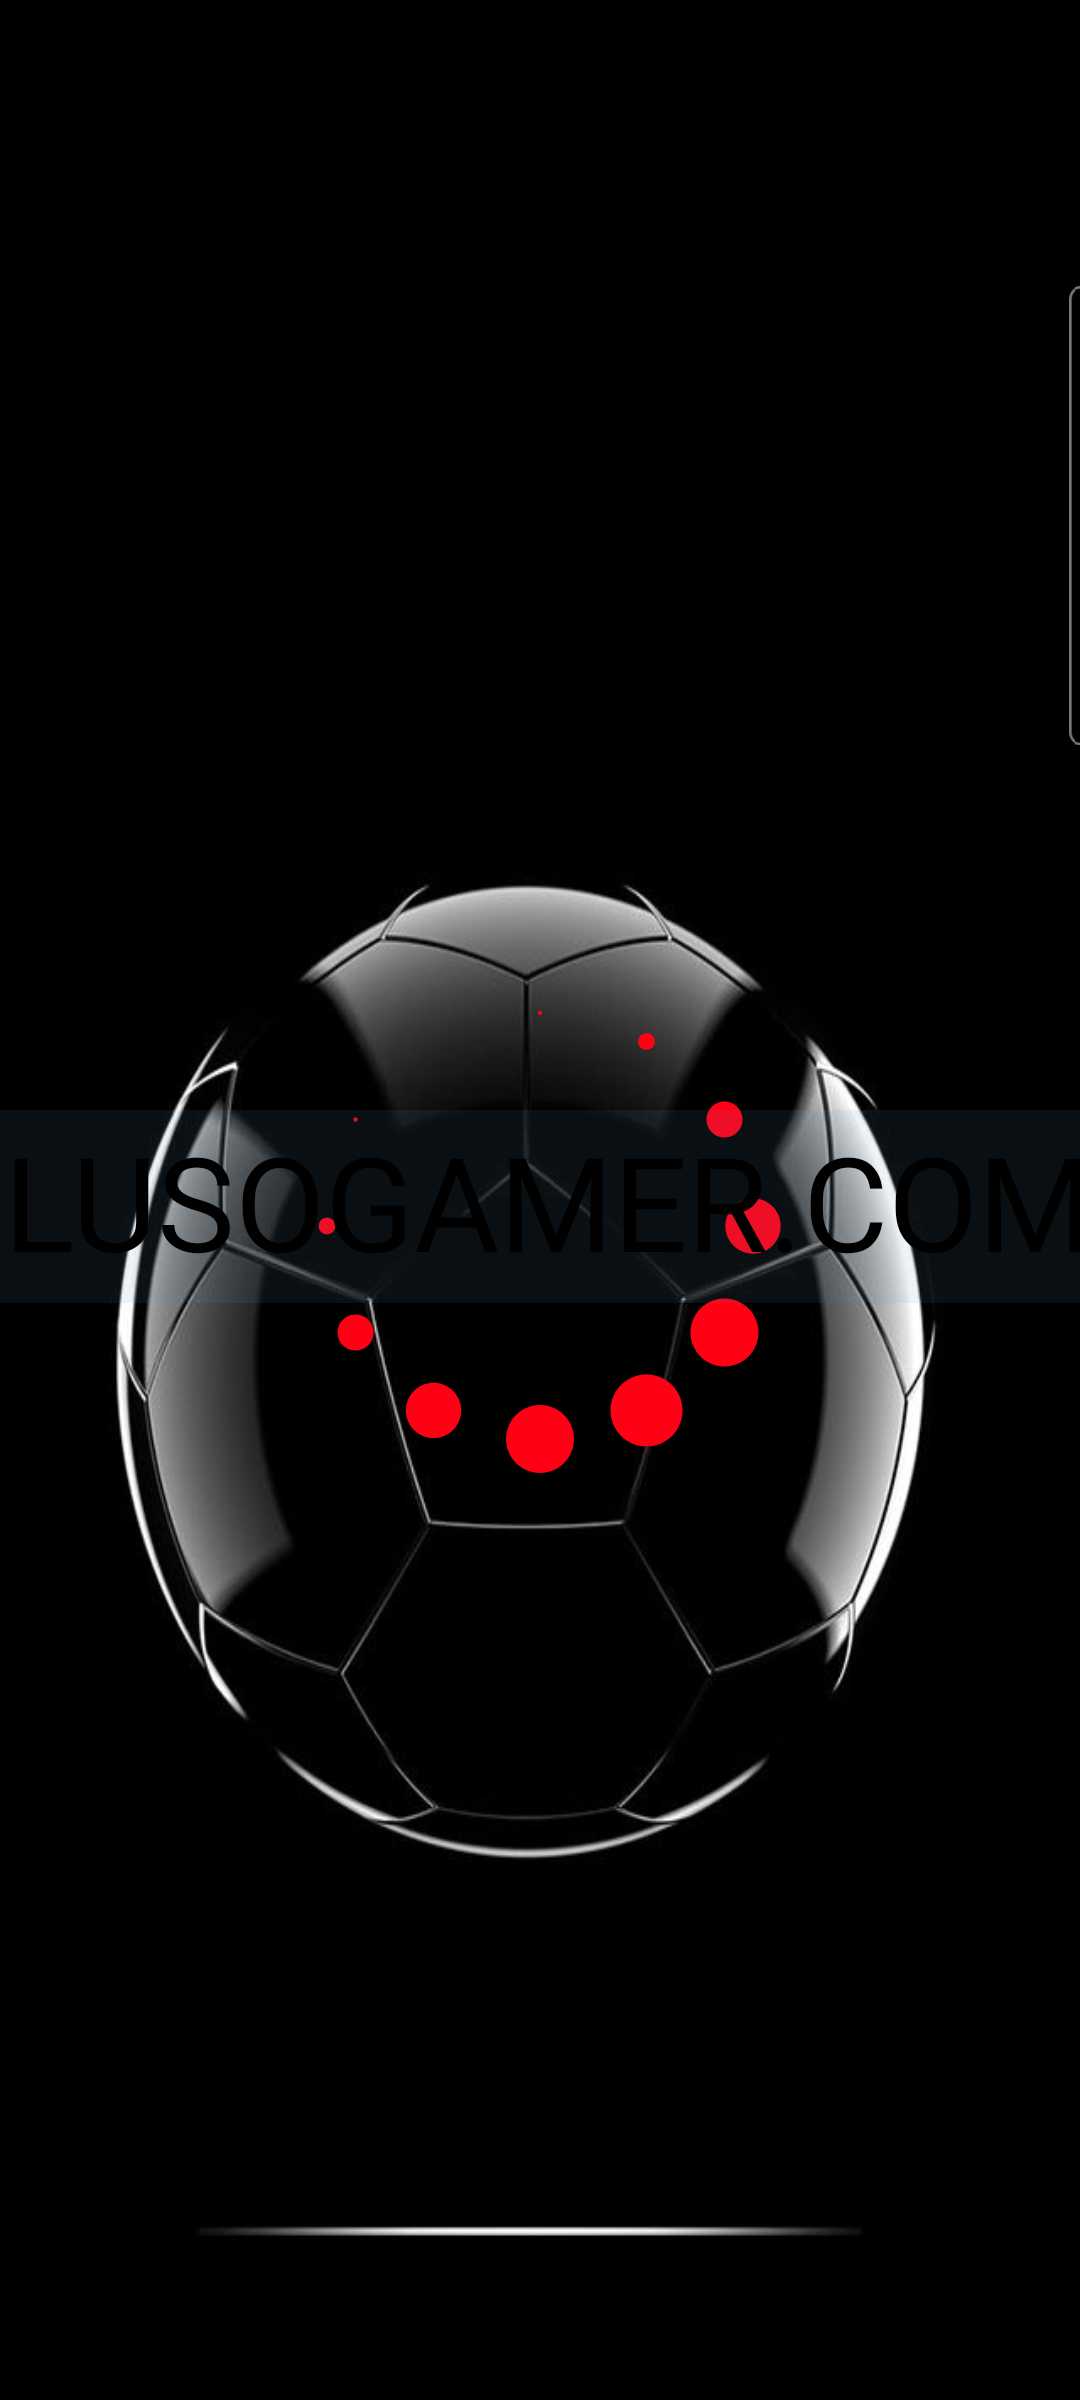 Live Football TV HD Apk Download For Android [Sports App]